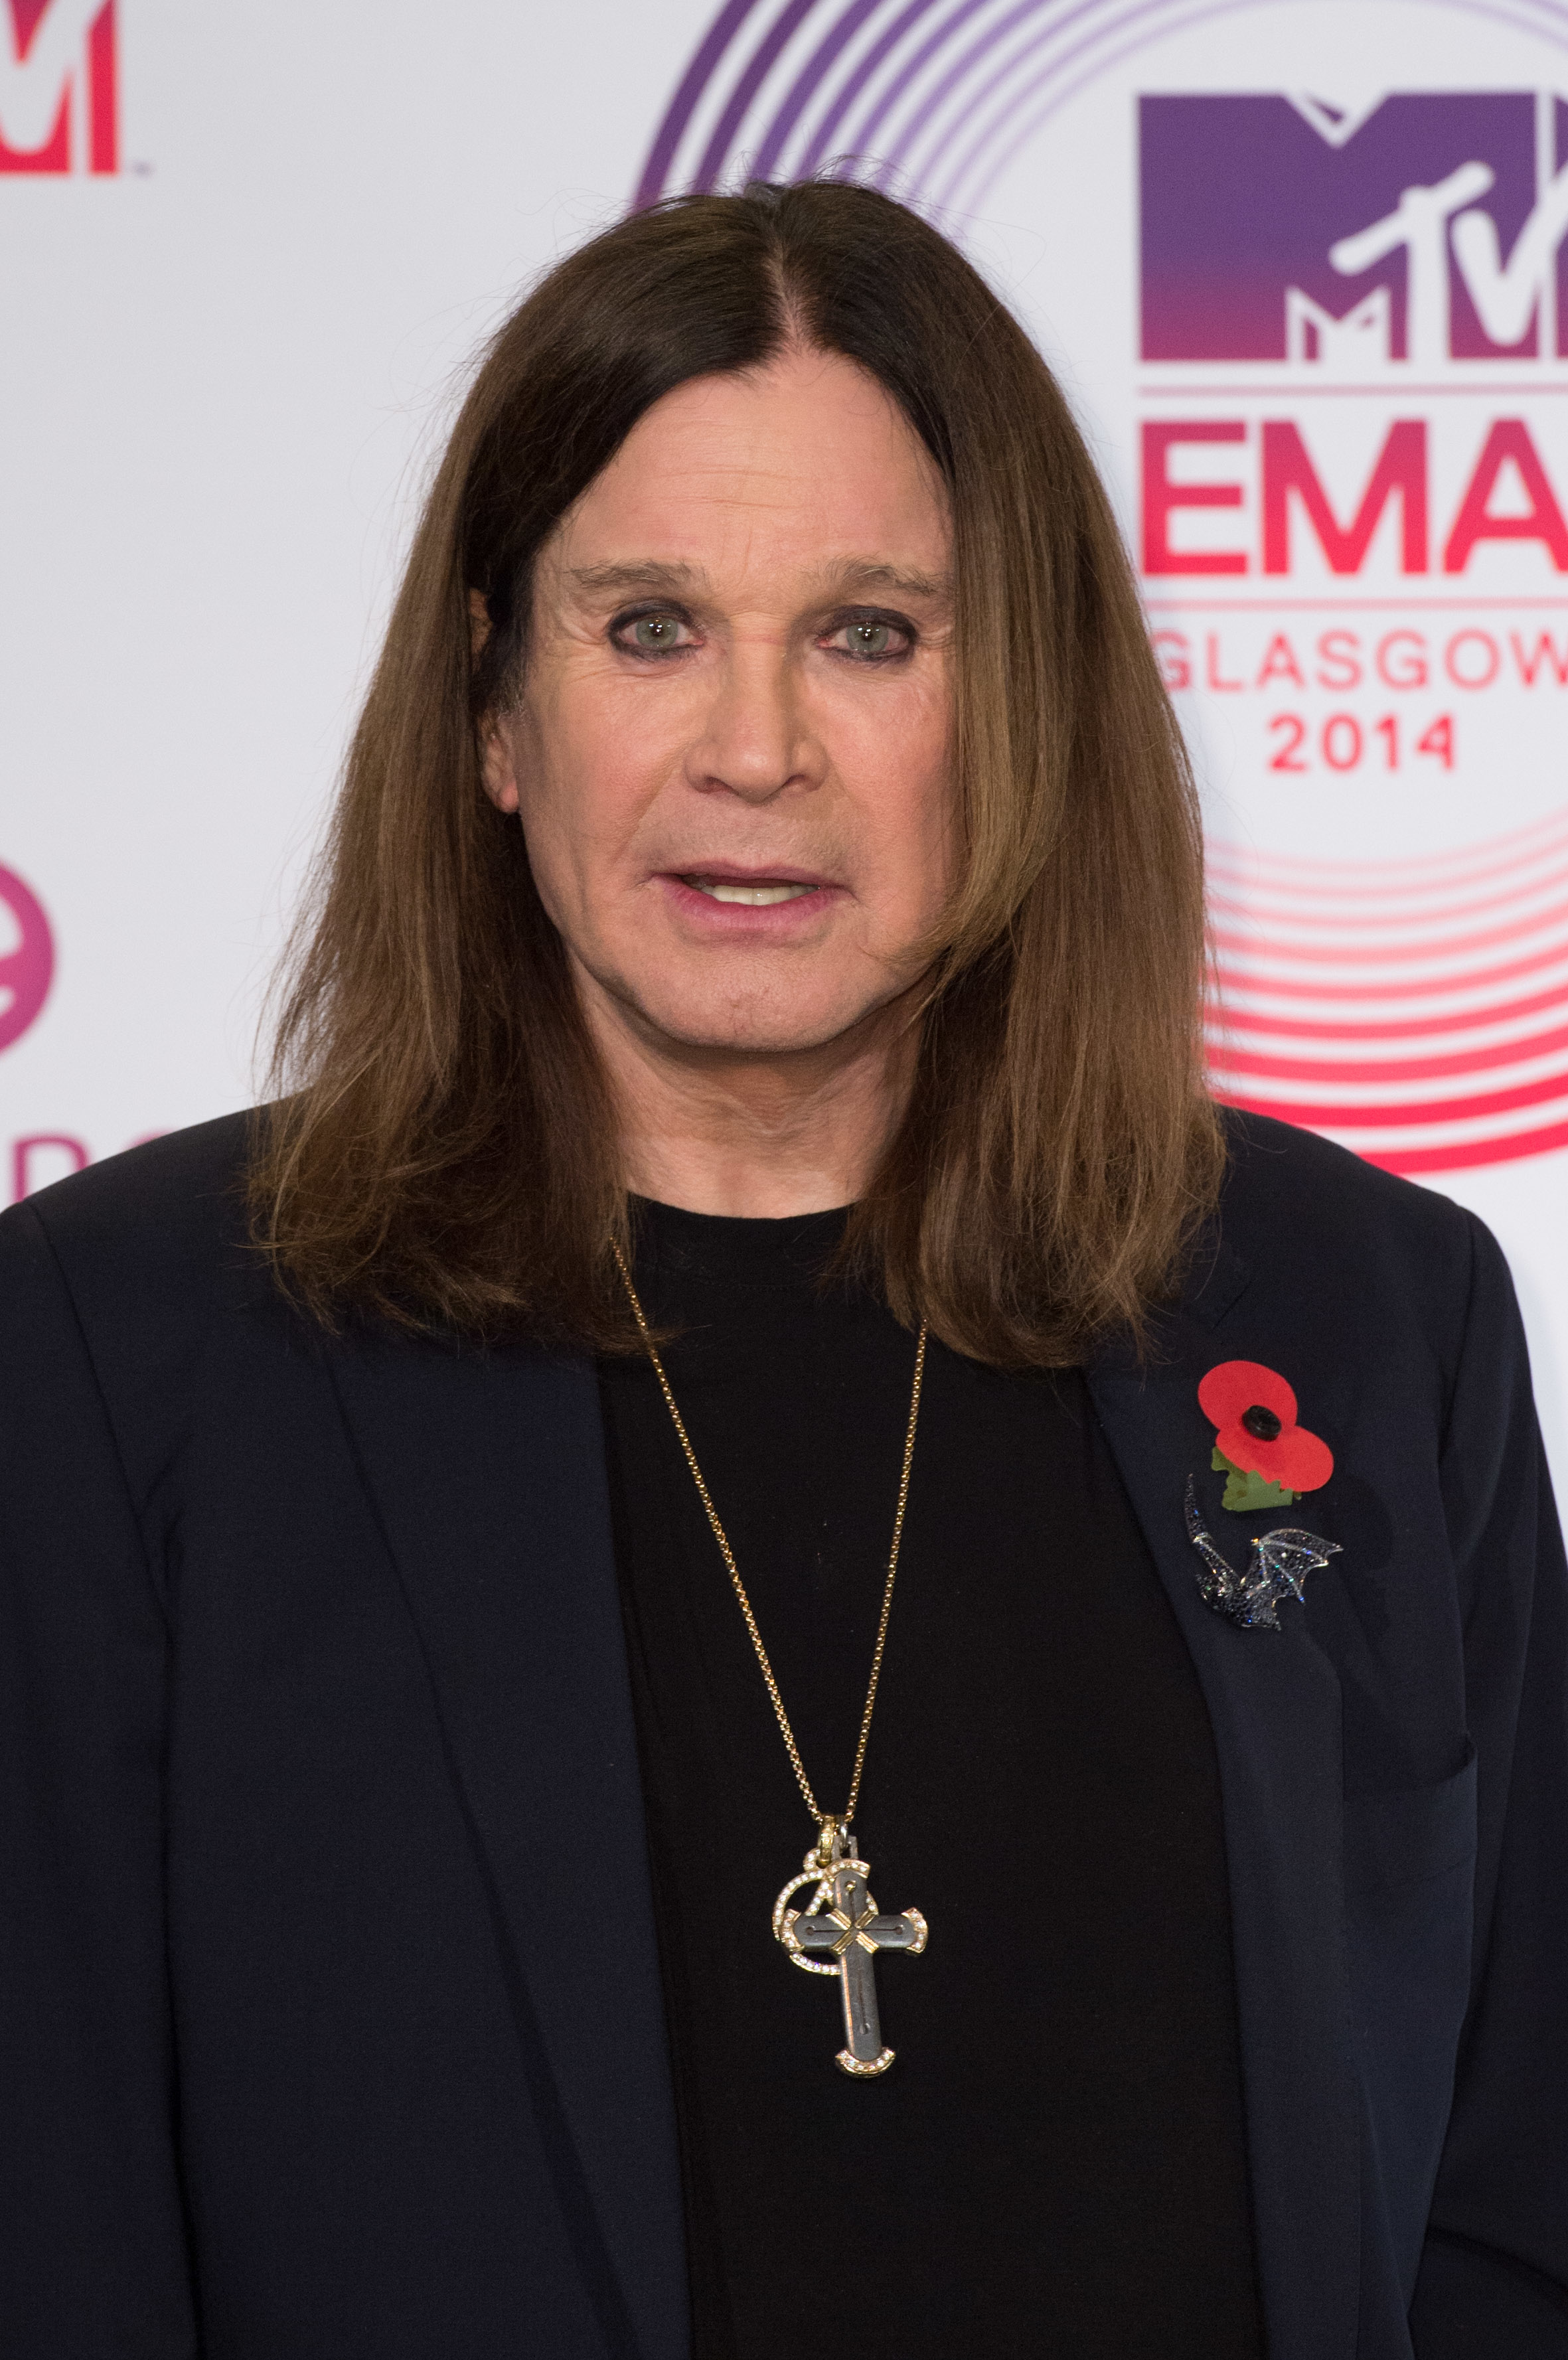 Ozzy Osbourne at the MTV EMA's 2014 on November 9, 2014 in Glasgow, Scotland. | Source: Getty Images